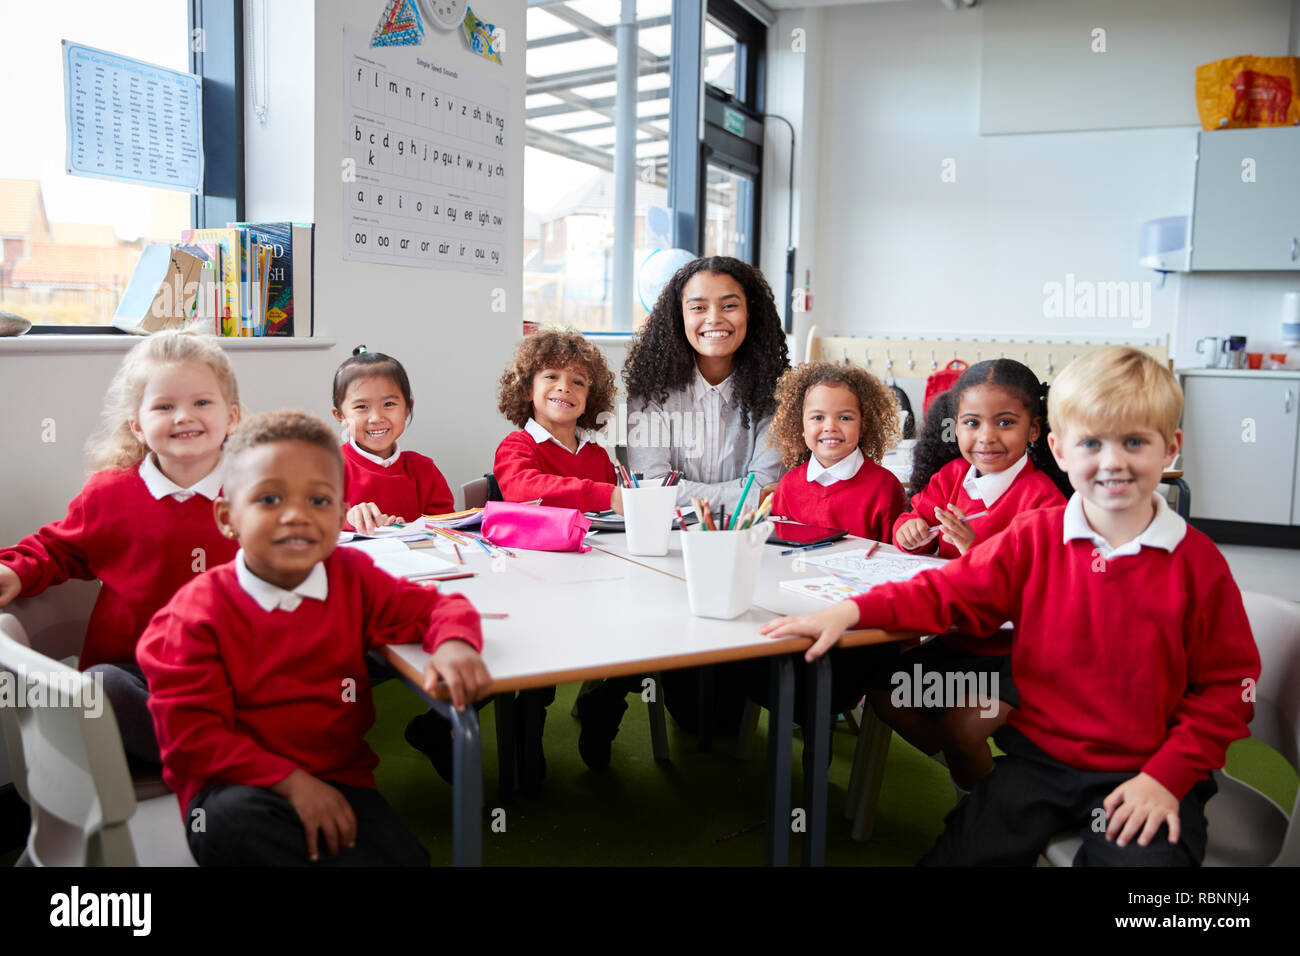 Group portrait of infant school teacher and kids sitting at table in a classroom looking to camera smiling, front view Stock Photo